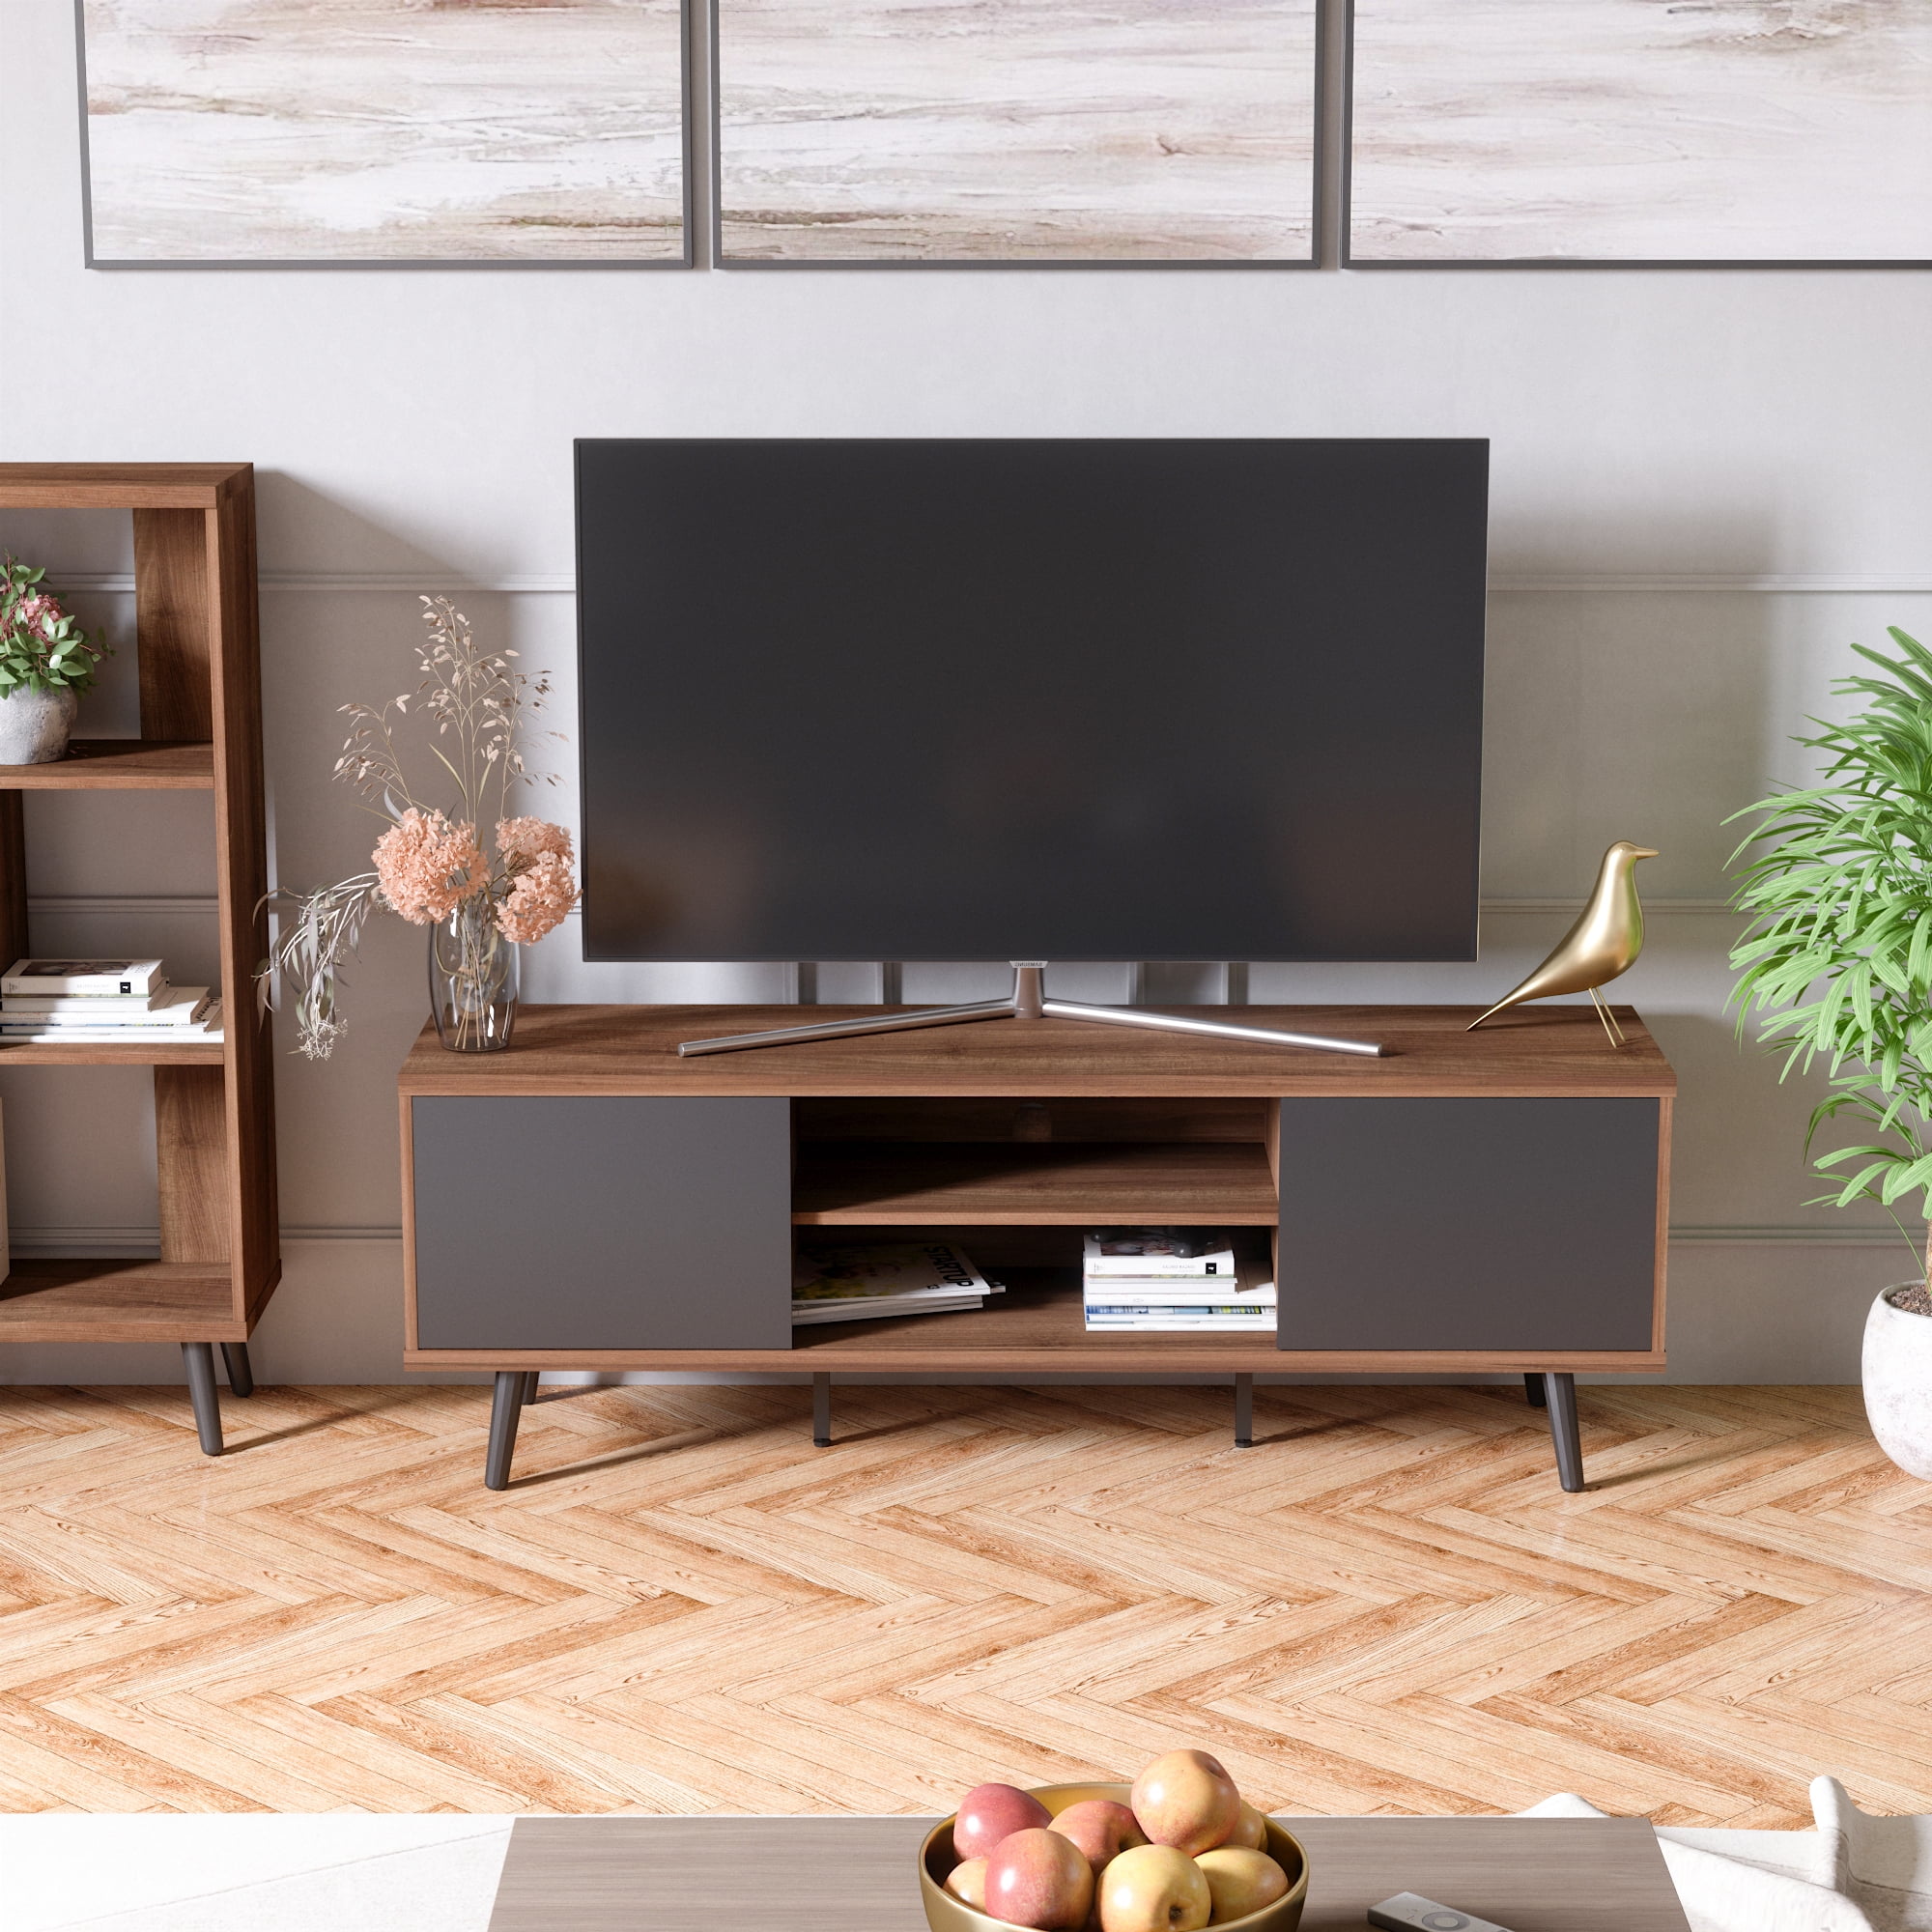 Details about   TV Stand For 60Inch Tv Flat Screens 5 Shelves Entertainment Center Storage Video 